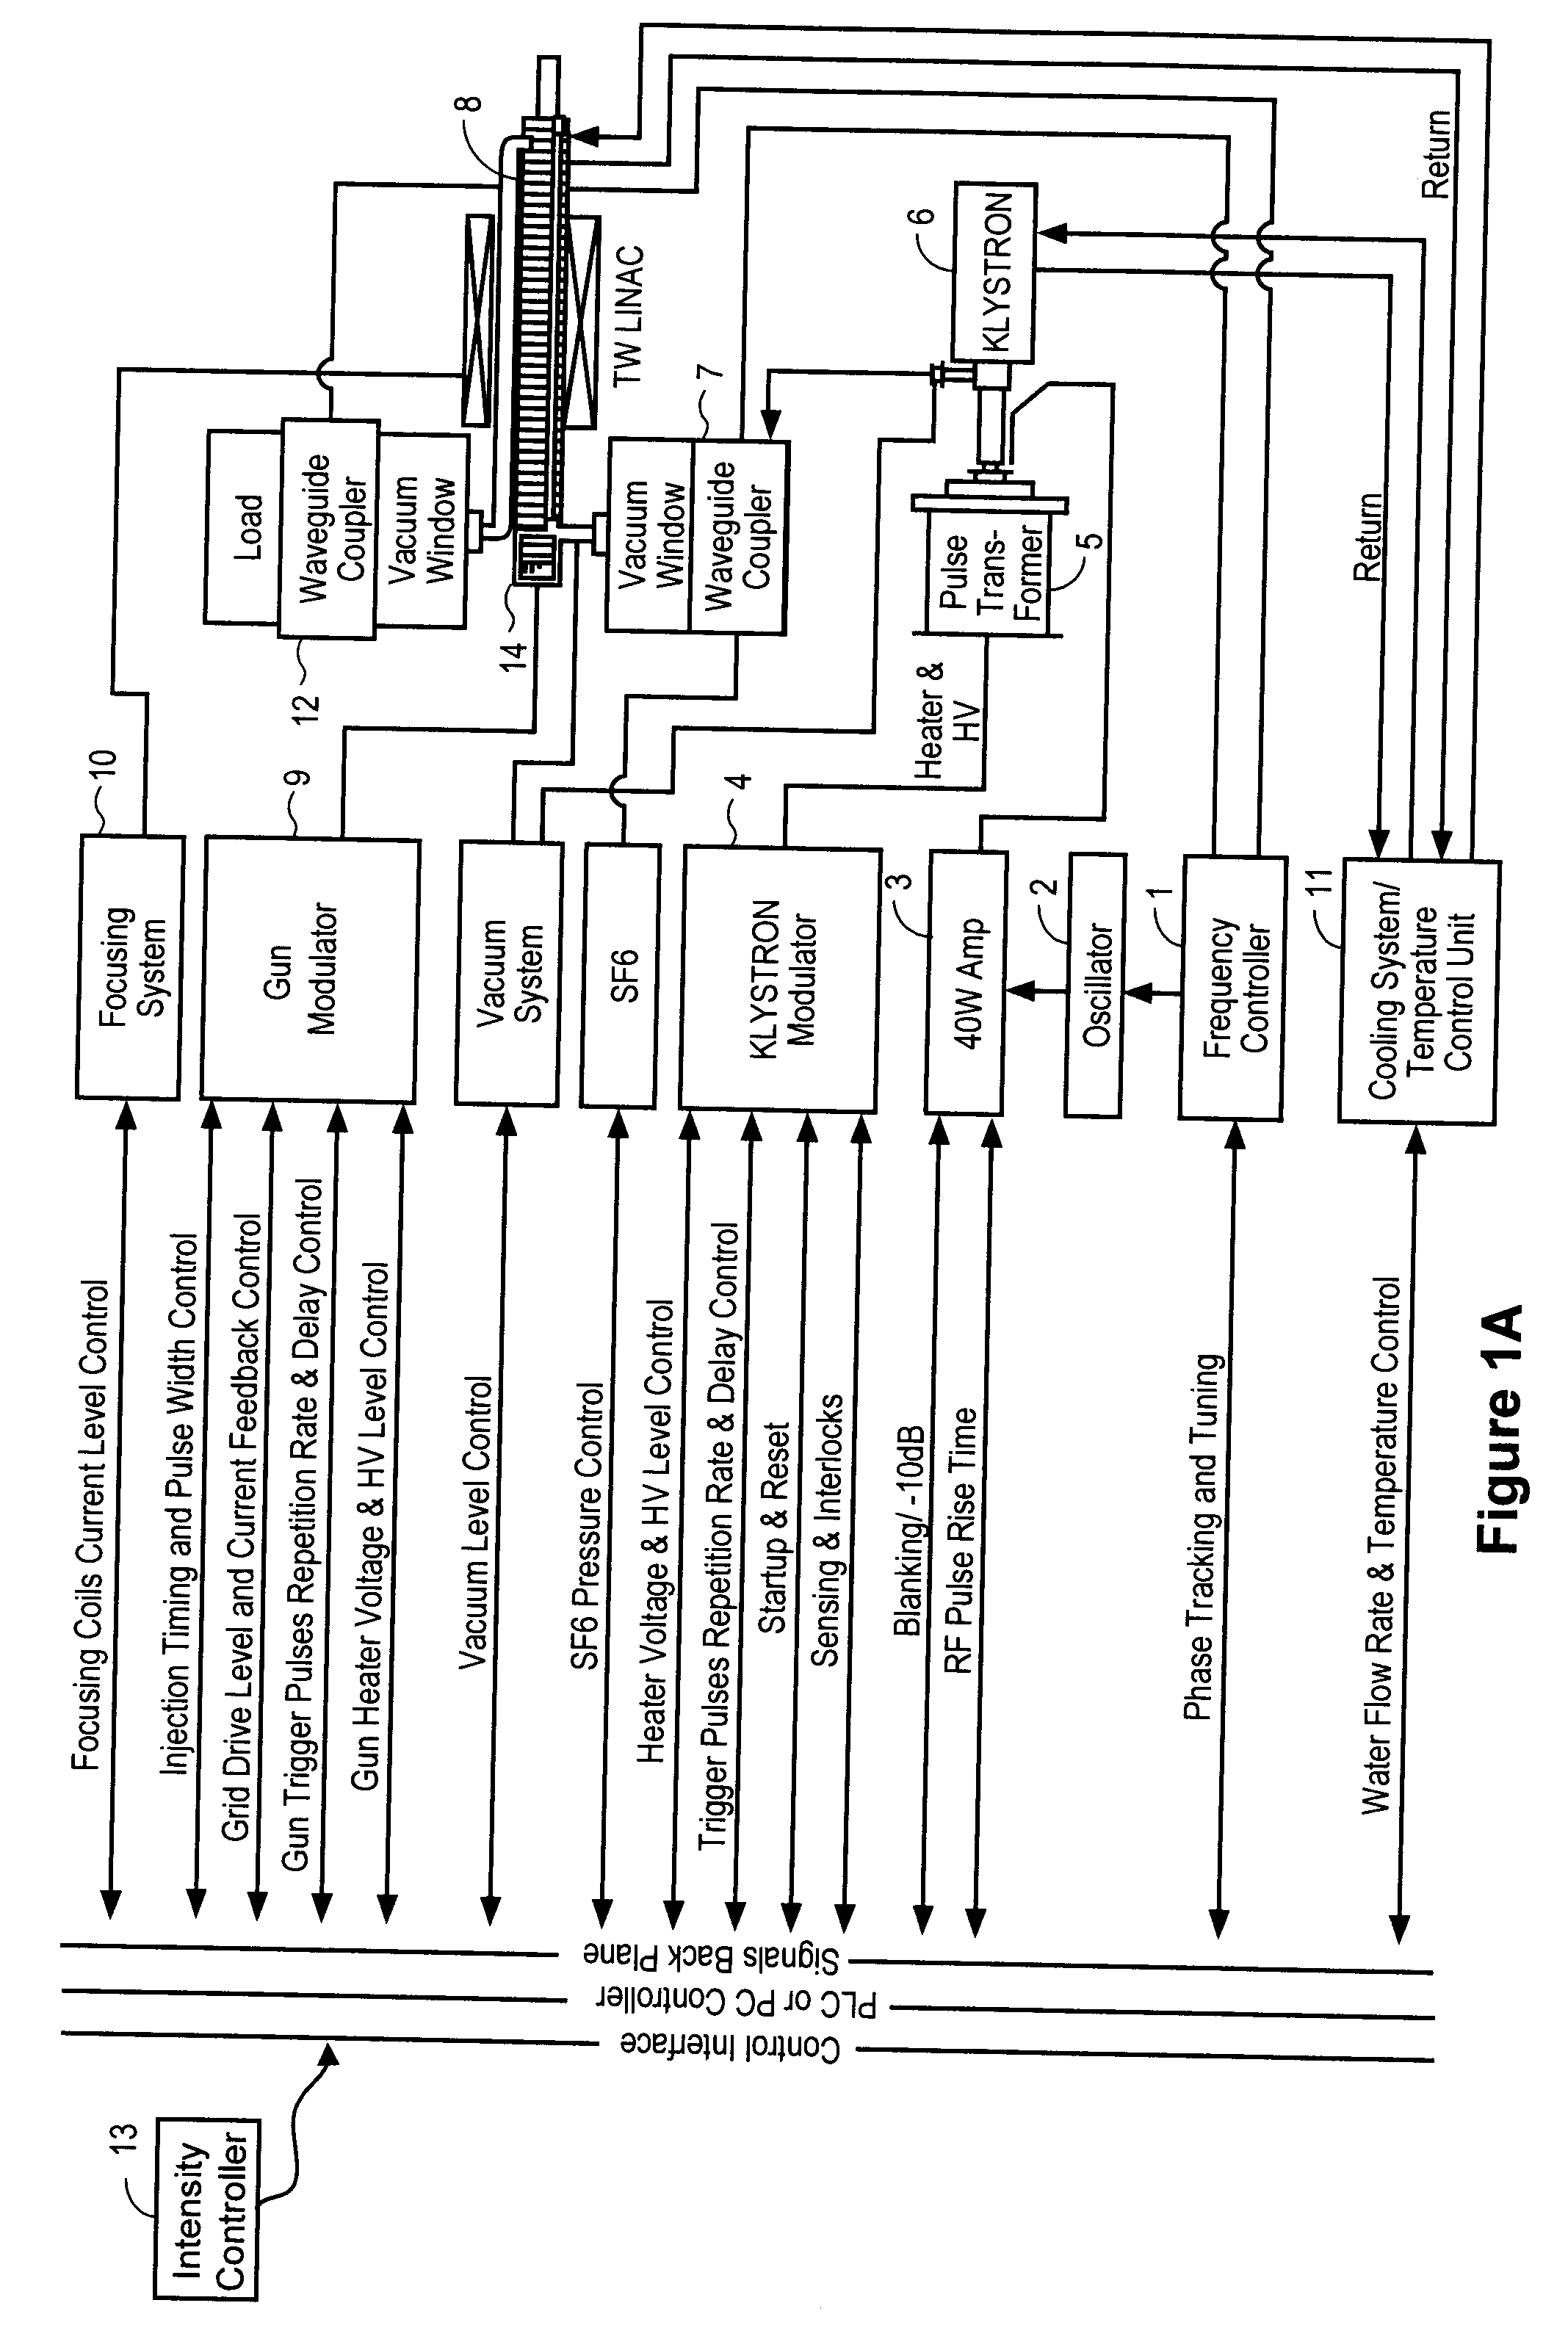 Systems and methods for cargo scanning and radiotherapy using a traveling wave linear accelerator based x-ray source using pulse width to modulate pulse-to-pulse dosage